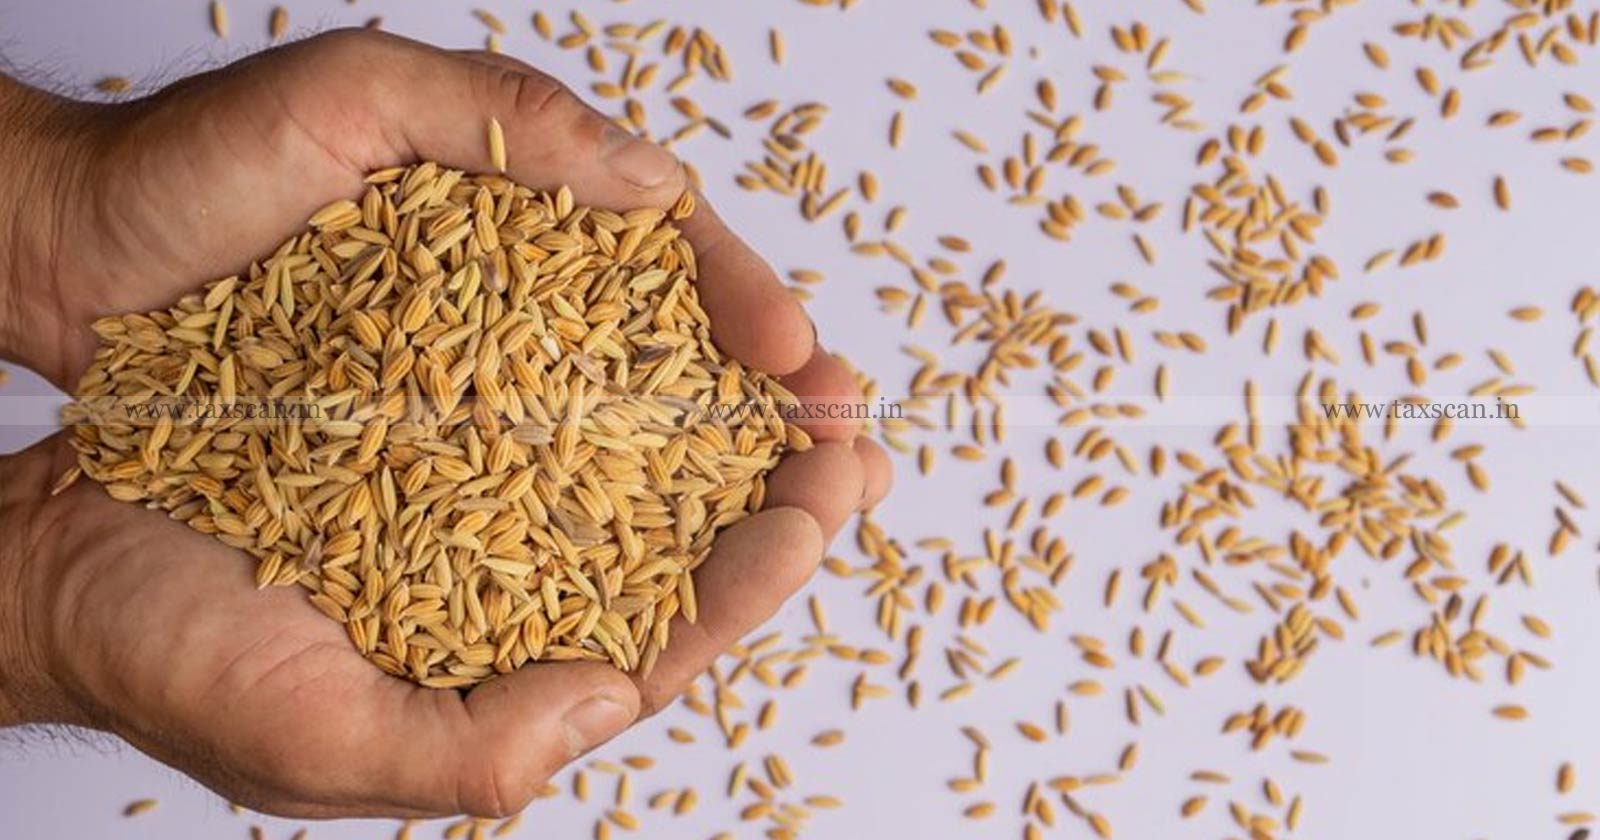 Rejected Paddy Seeds - Paddy Seeds - Human Consumption - GST - AAR - Authority for Advance Ruling - taxscan